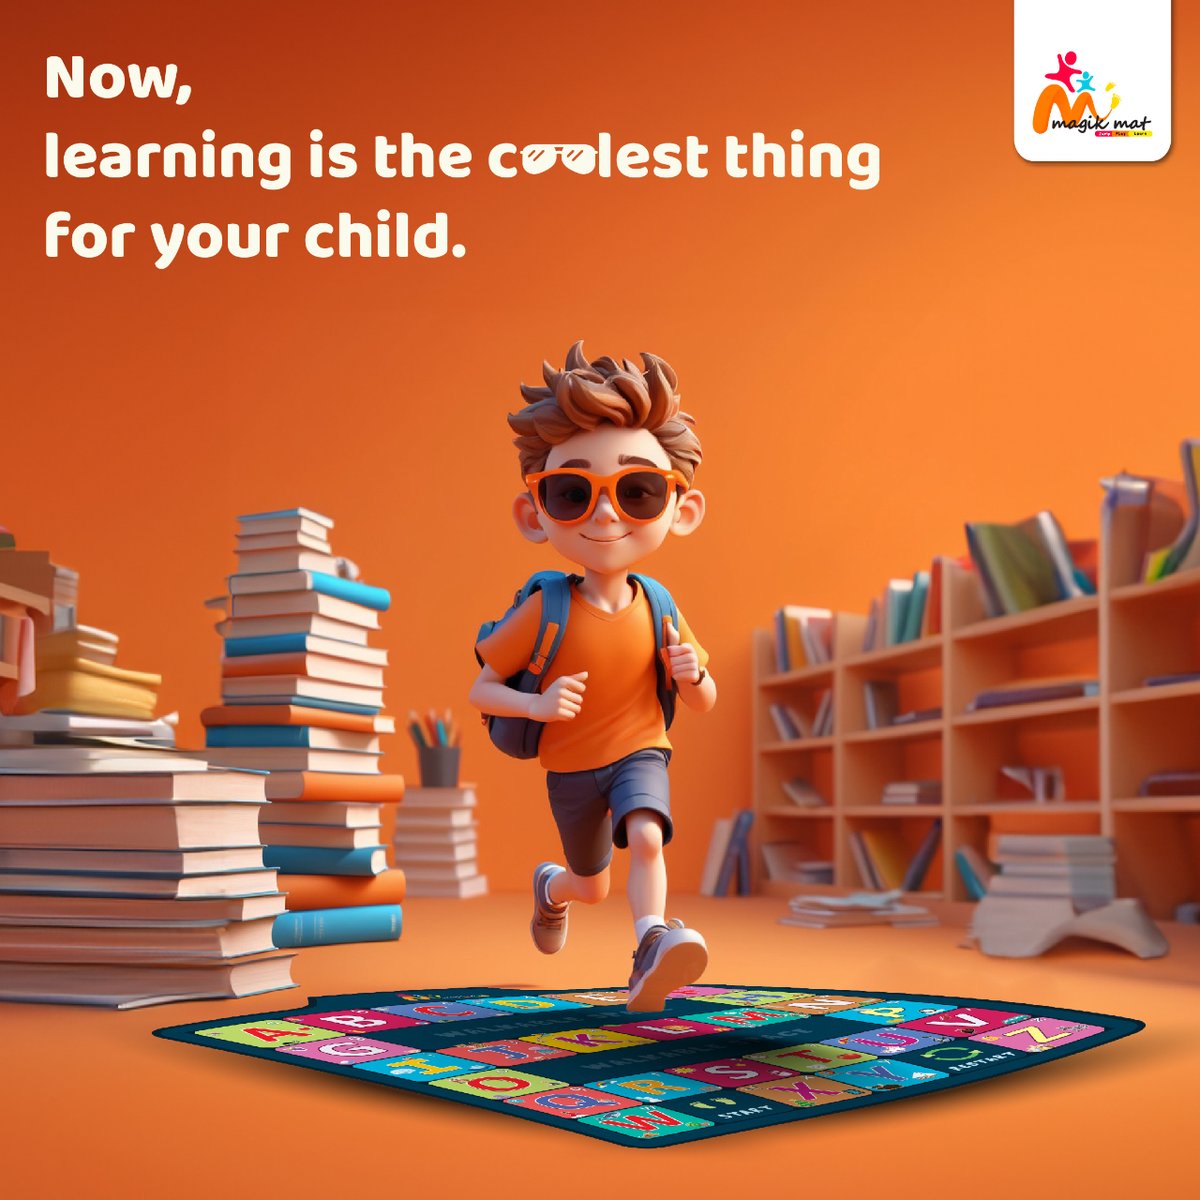 Instill curiosity and transform playtime into exploration and a fun-filled journey with Magik Mat, fostering a love for learning in your kids with every jump.

#Magikmat #learningthroughplay #PlayfulLearning #playinggames #playbasedlearning #earlylearning